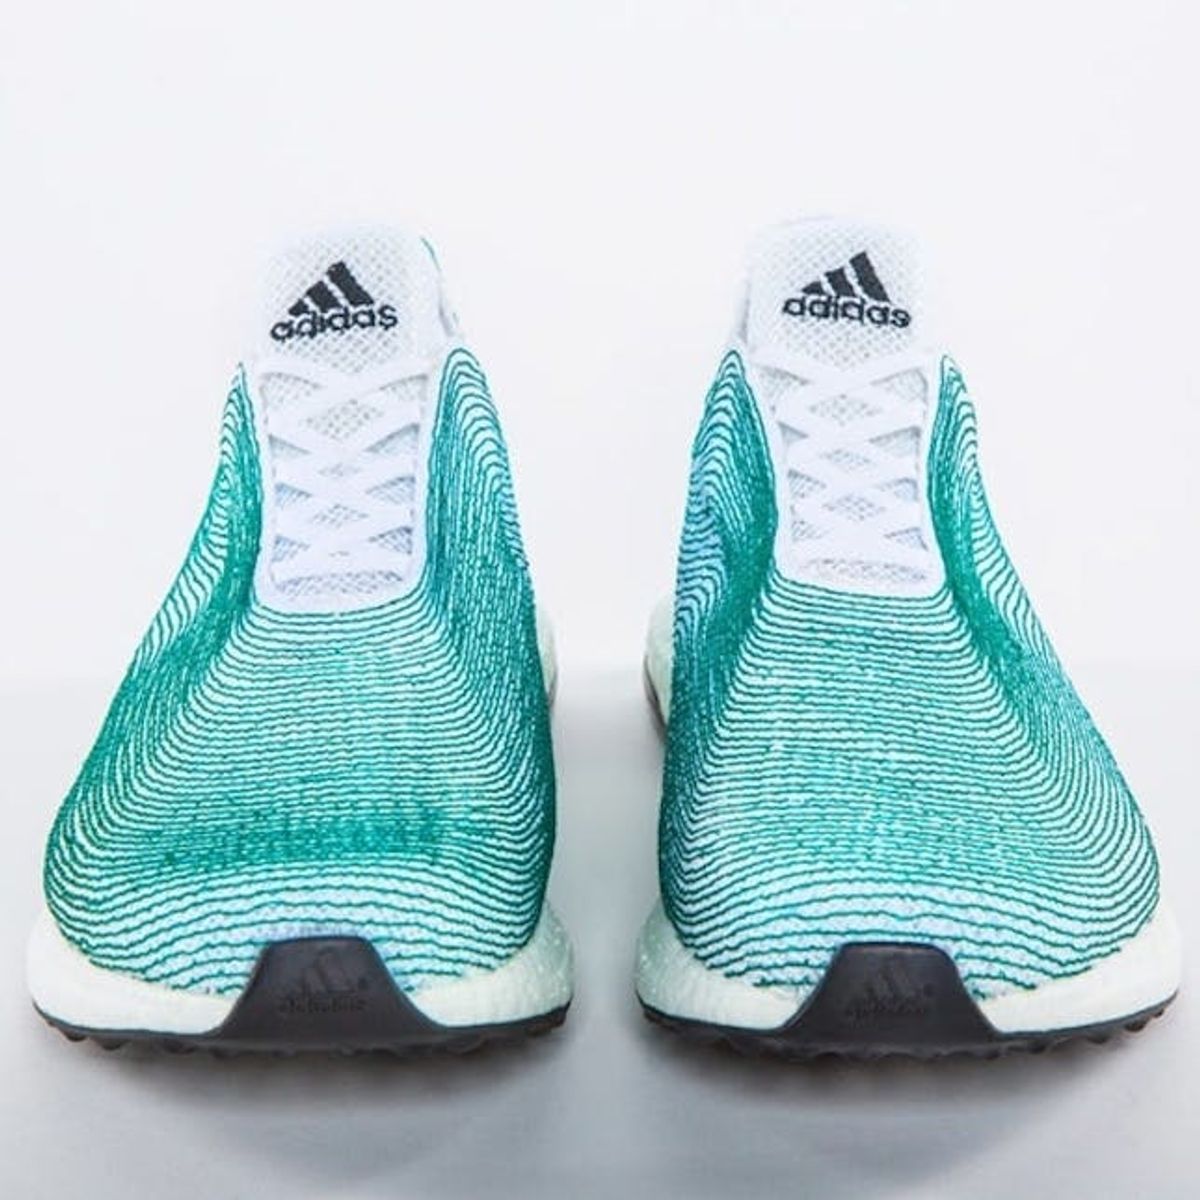 You’ll Never Guess What These Sneakers Are Made of